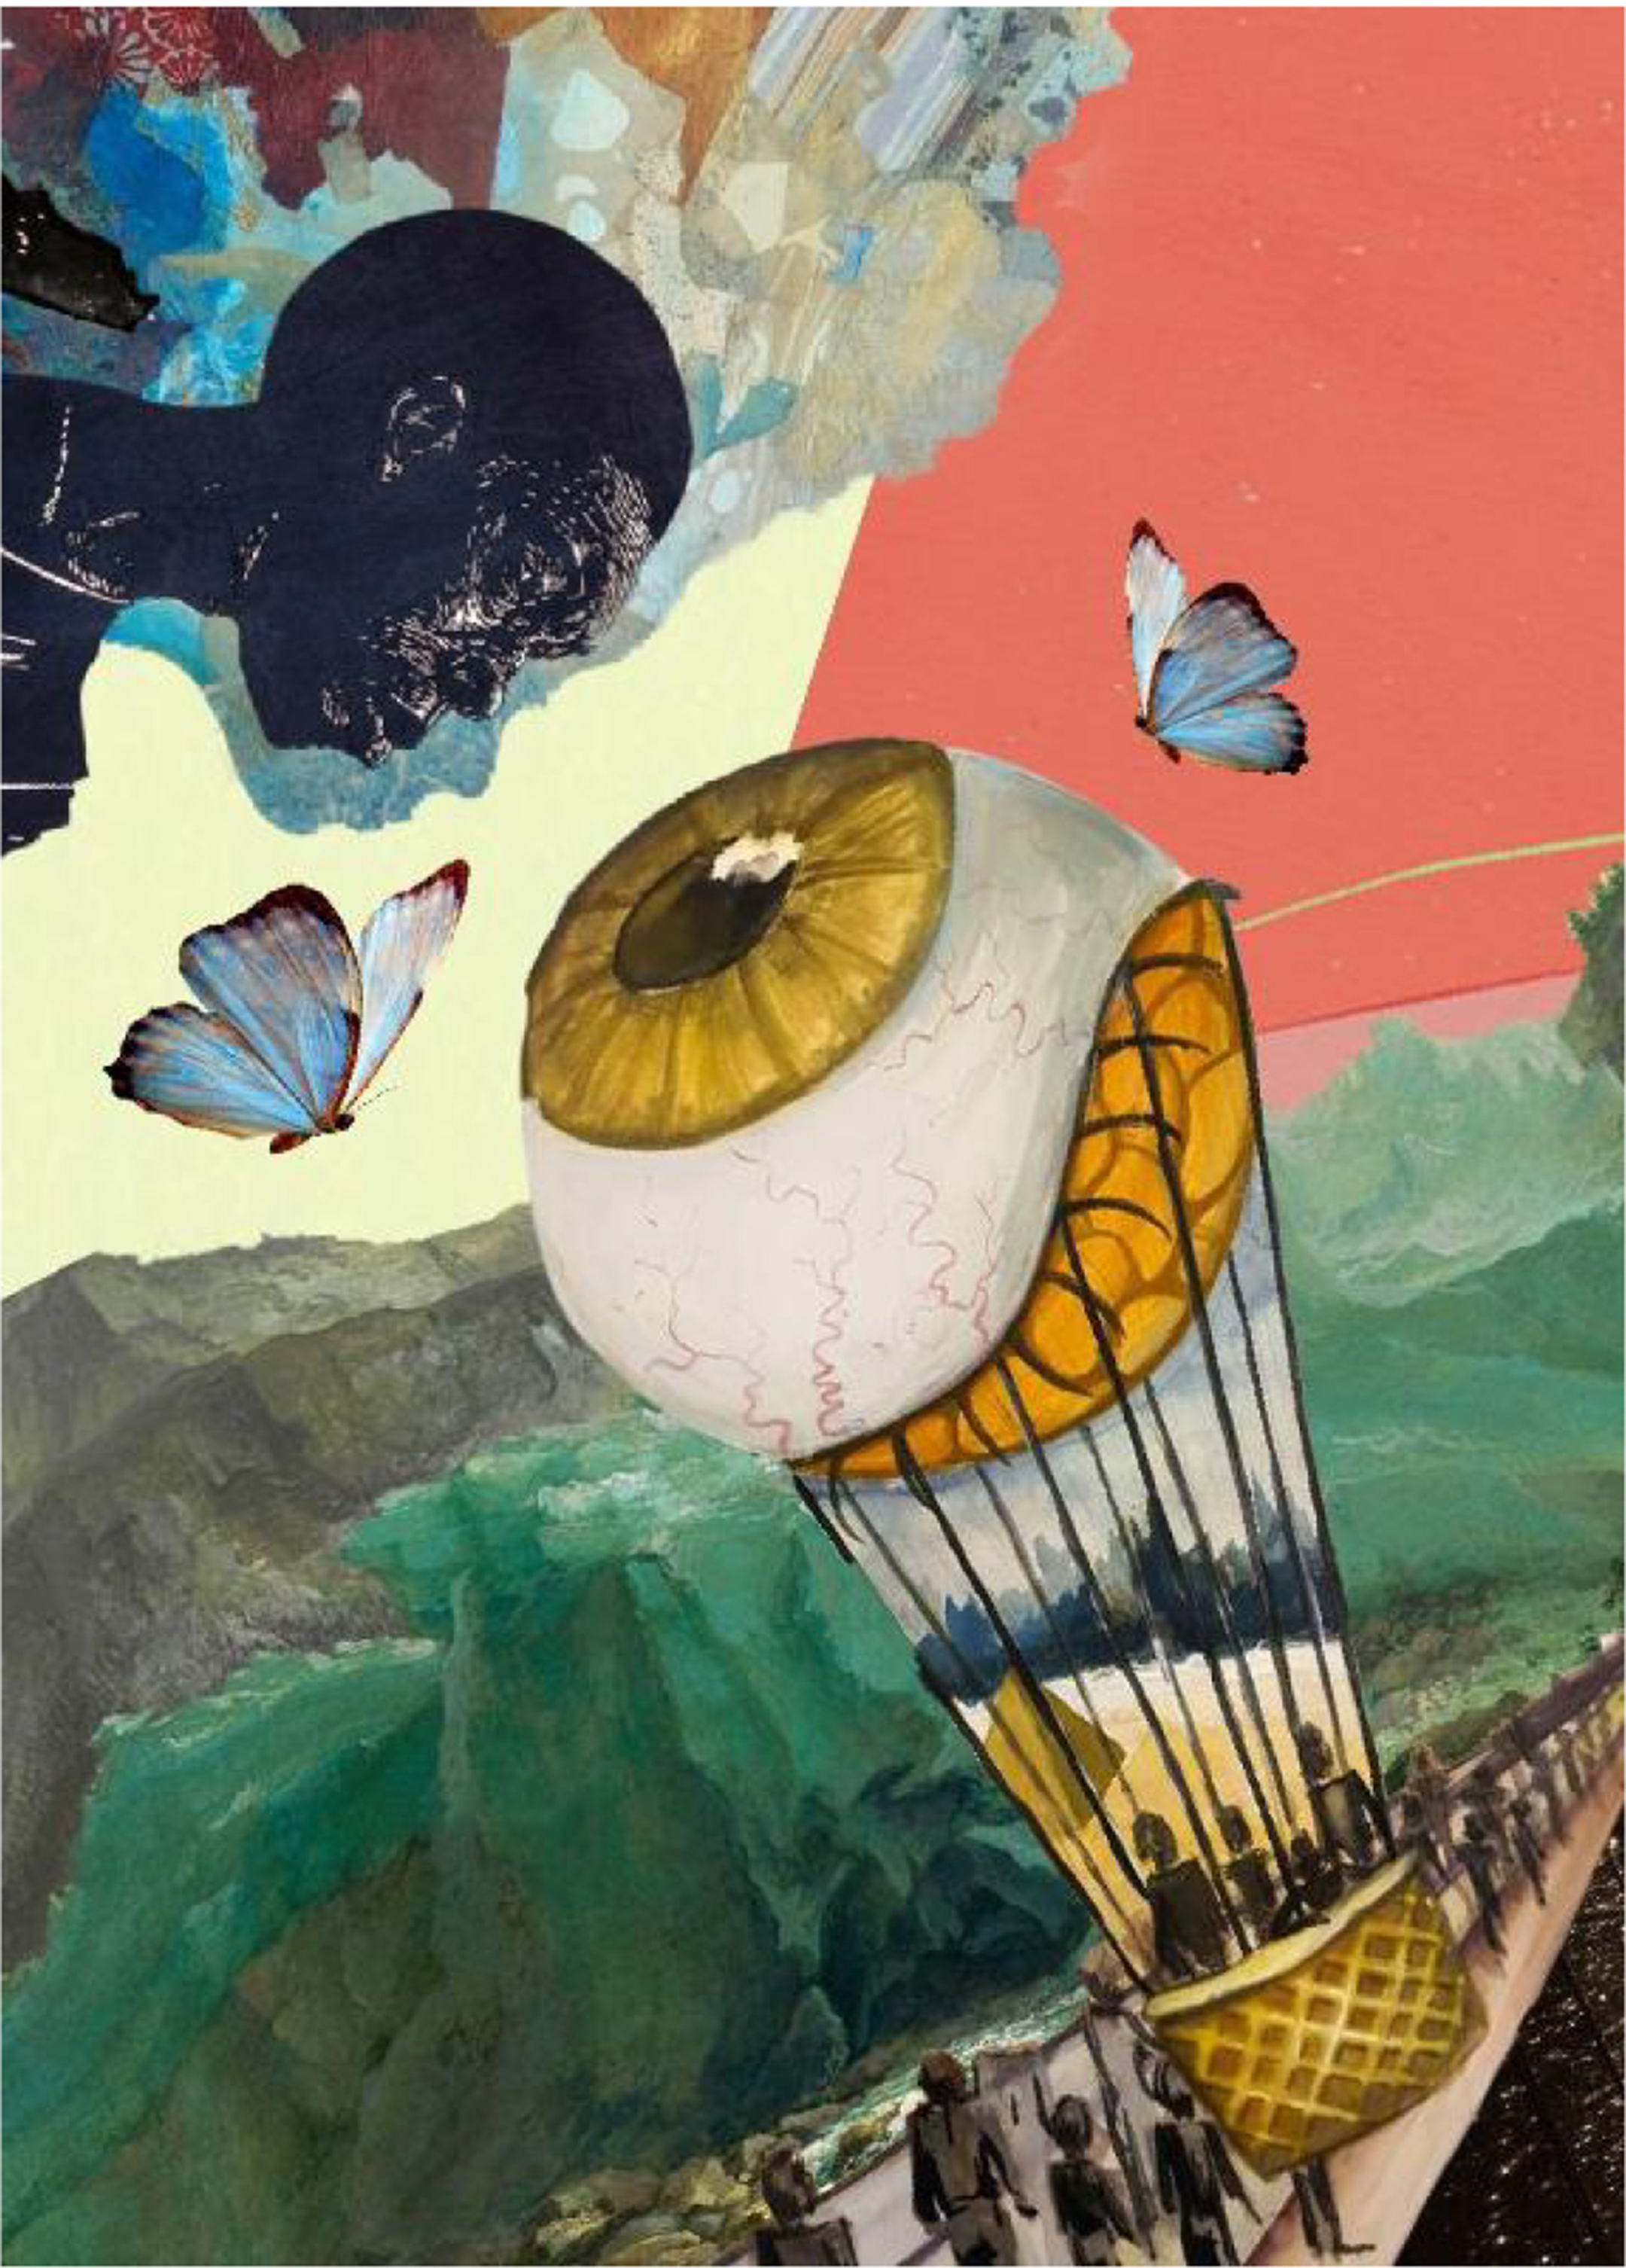 Illustrative collage of a young black man looking at a hot air balloon with a giant eye on the top of it